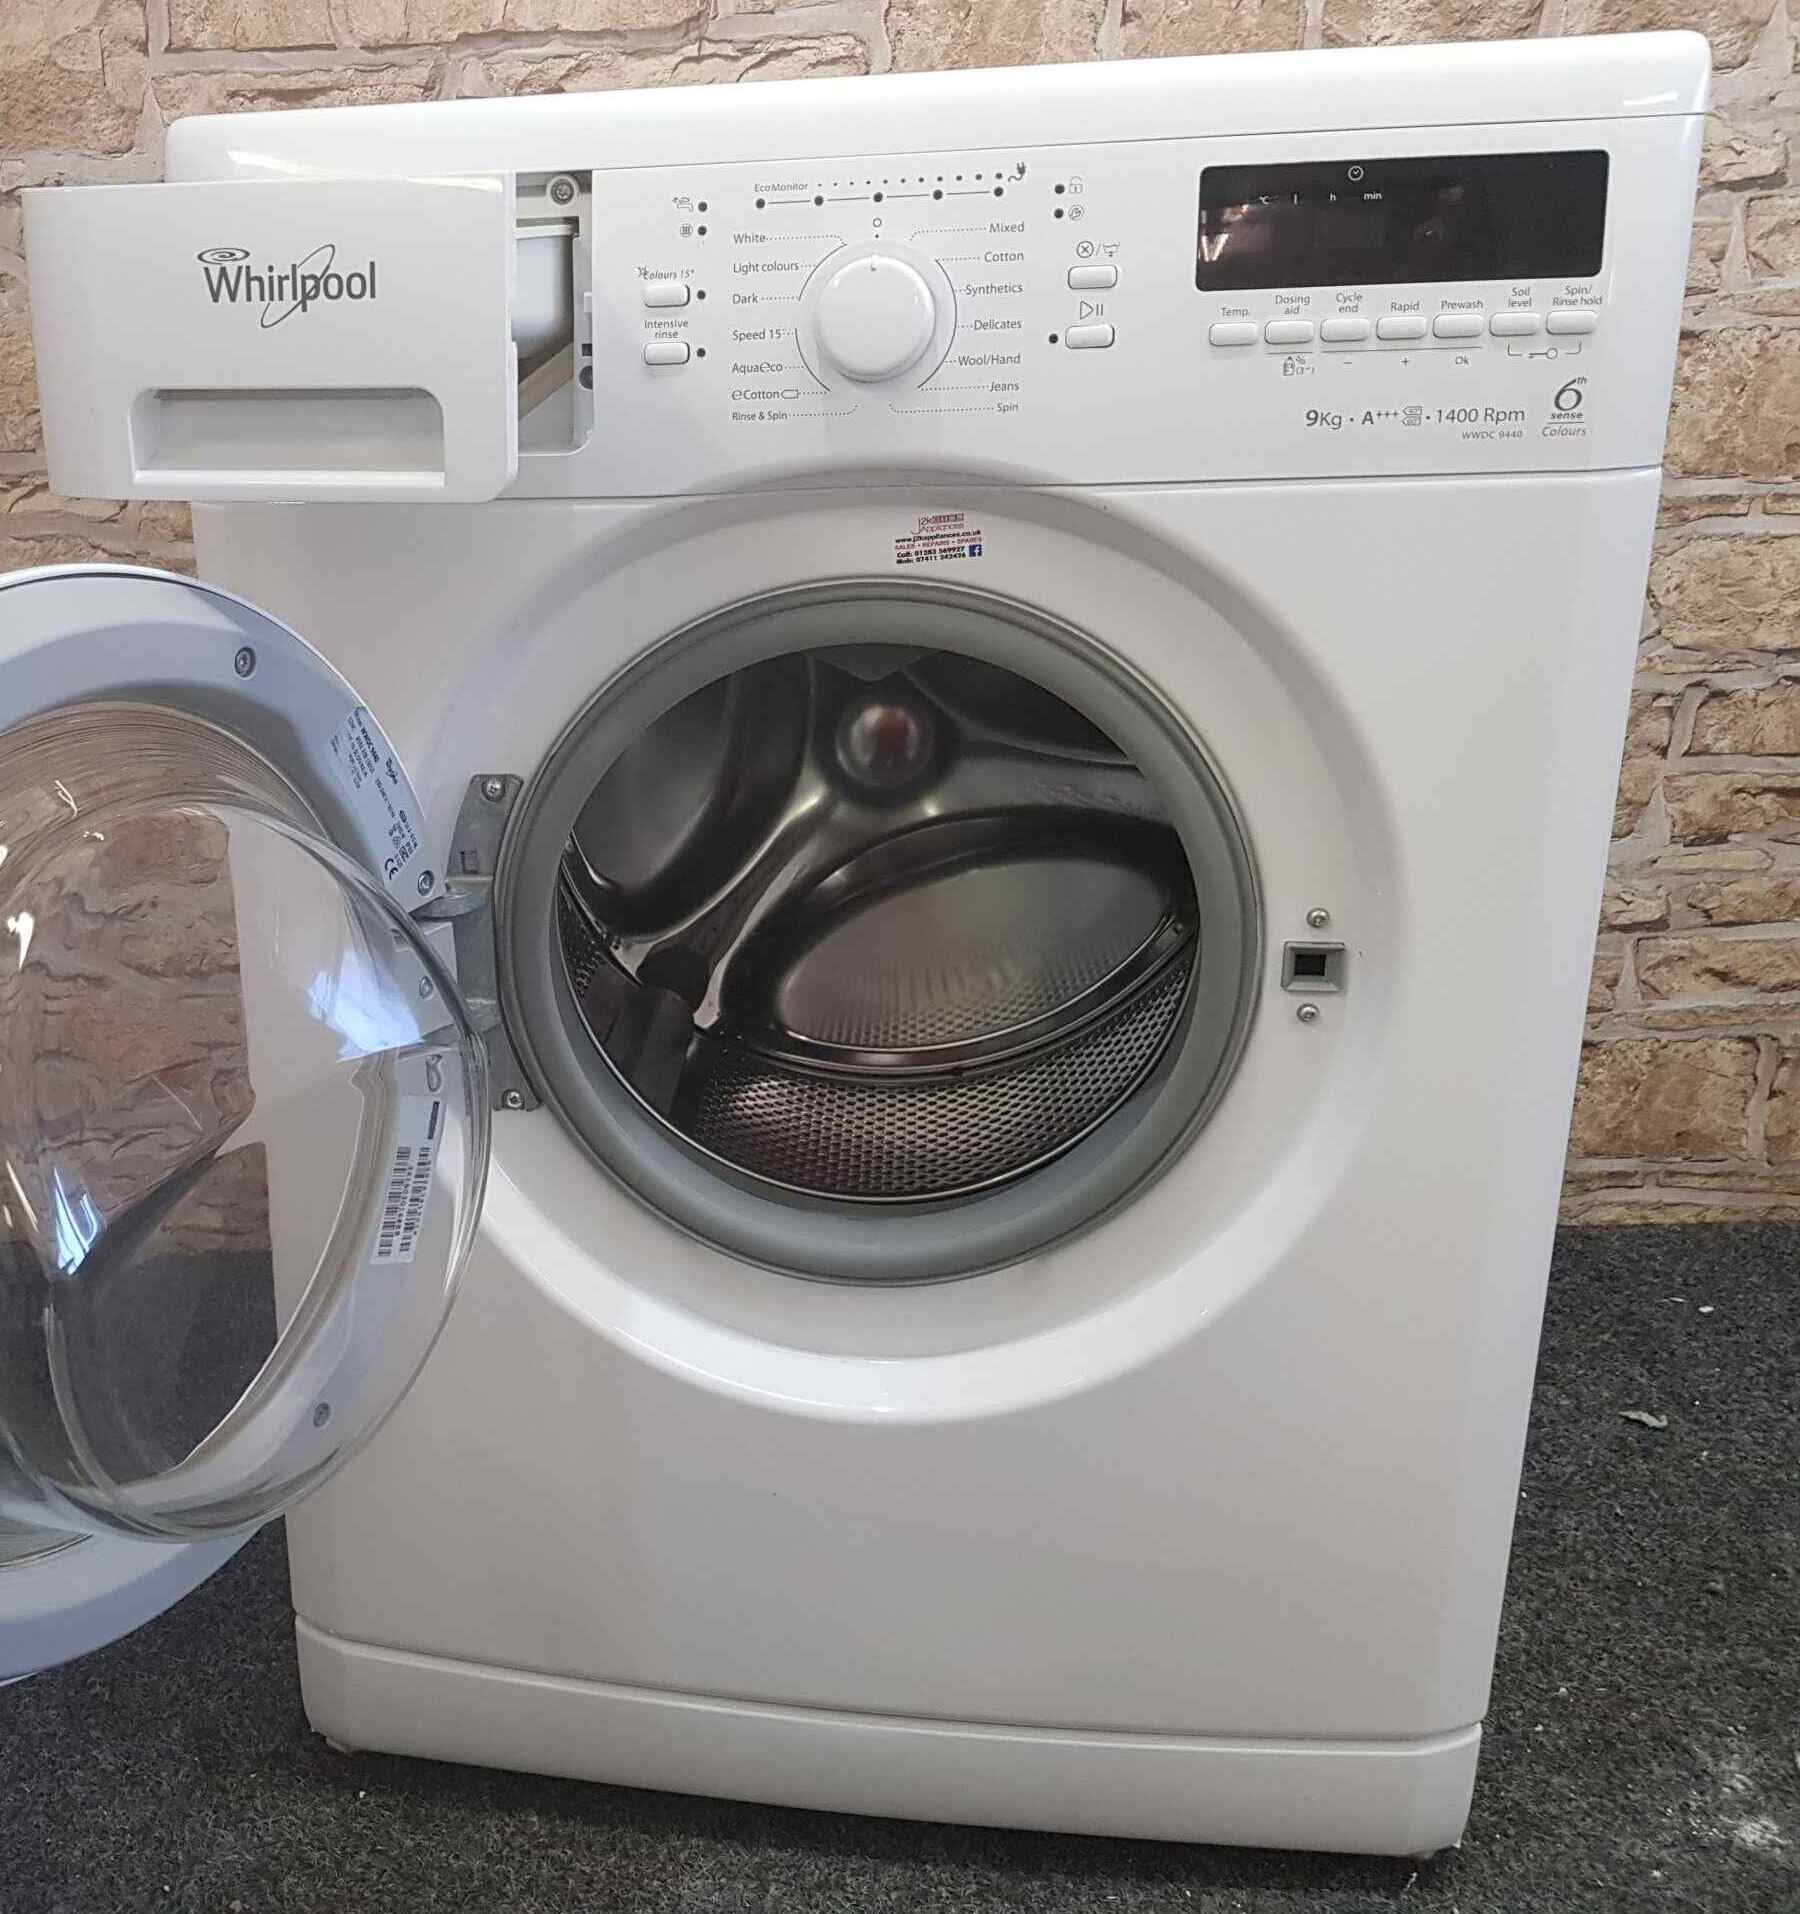 How To Fix The Error Code F25 For Whirlpool Washer